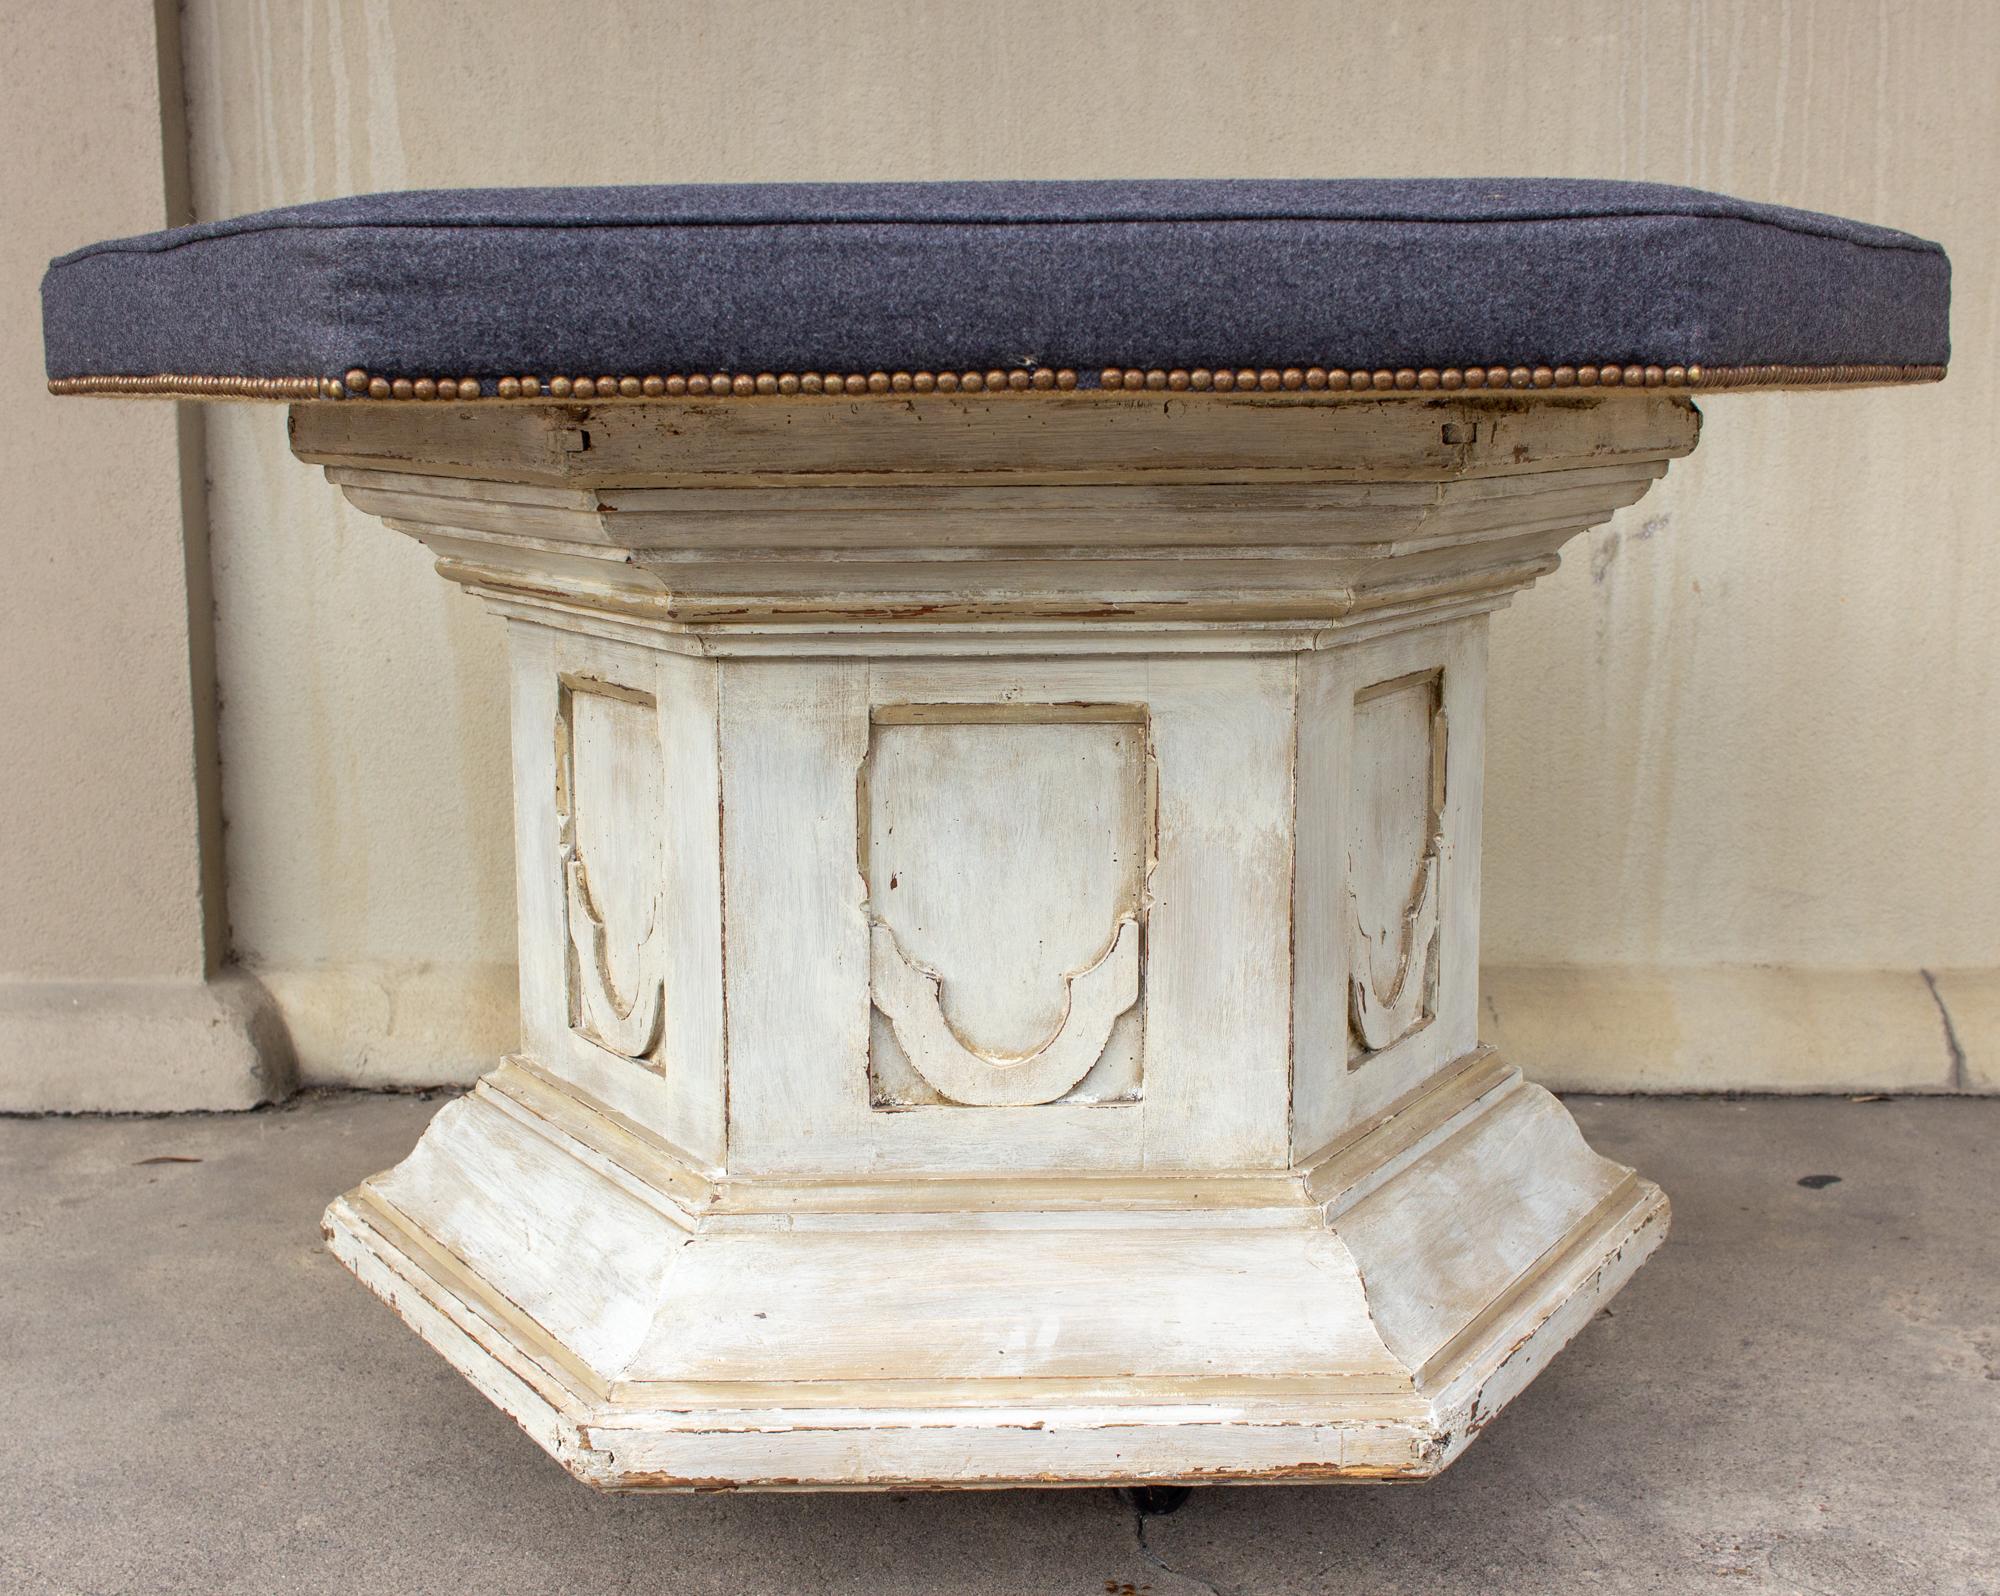 Brass Antique French Ecclesial Hexagonal-Shaped Ottoman with Gray Wool Upholstery For Sale